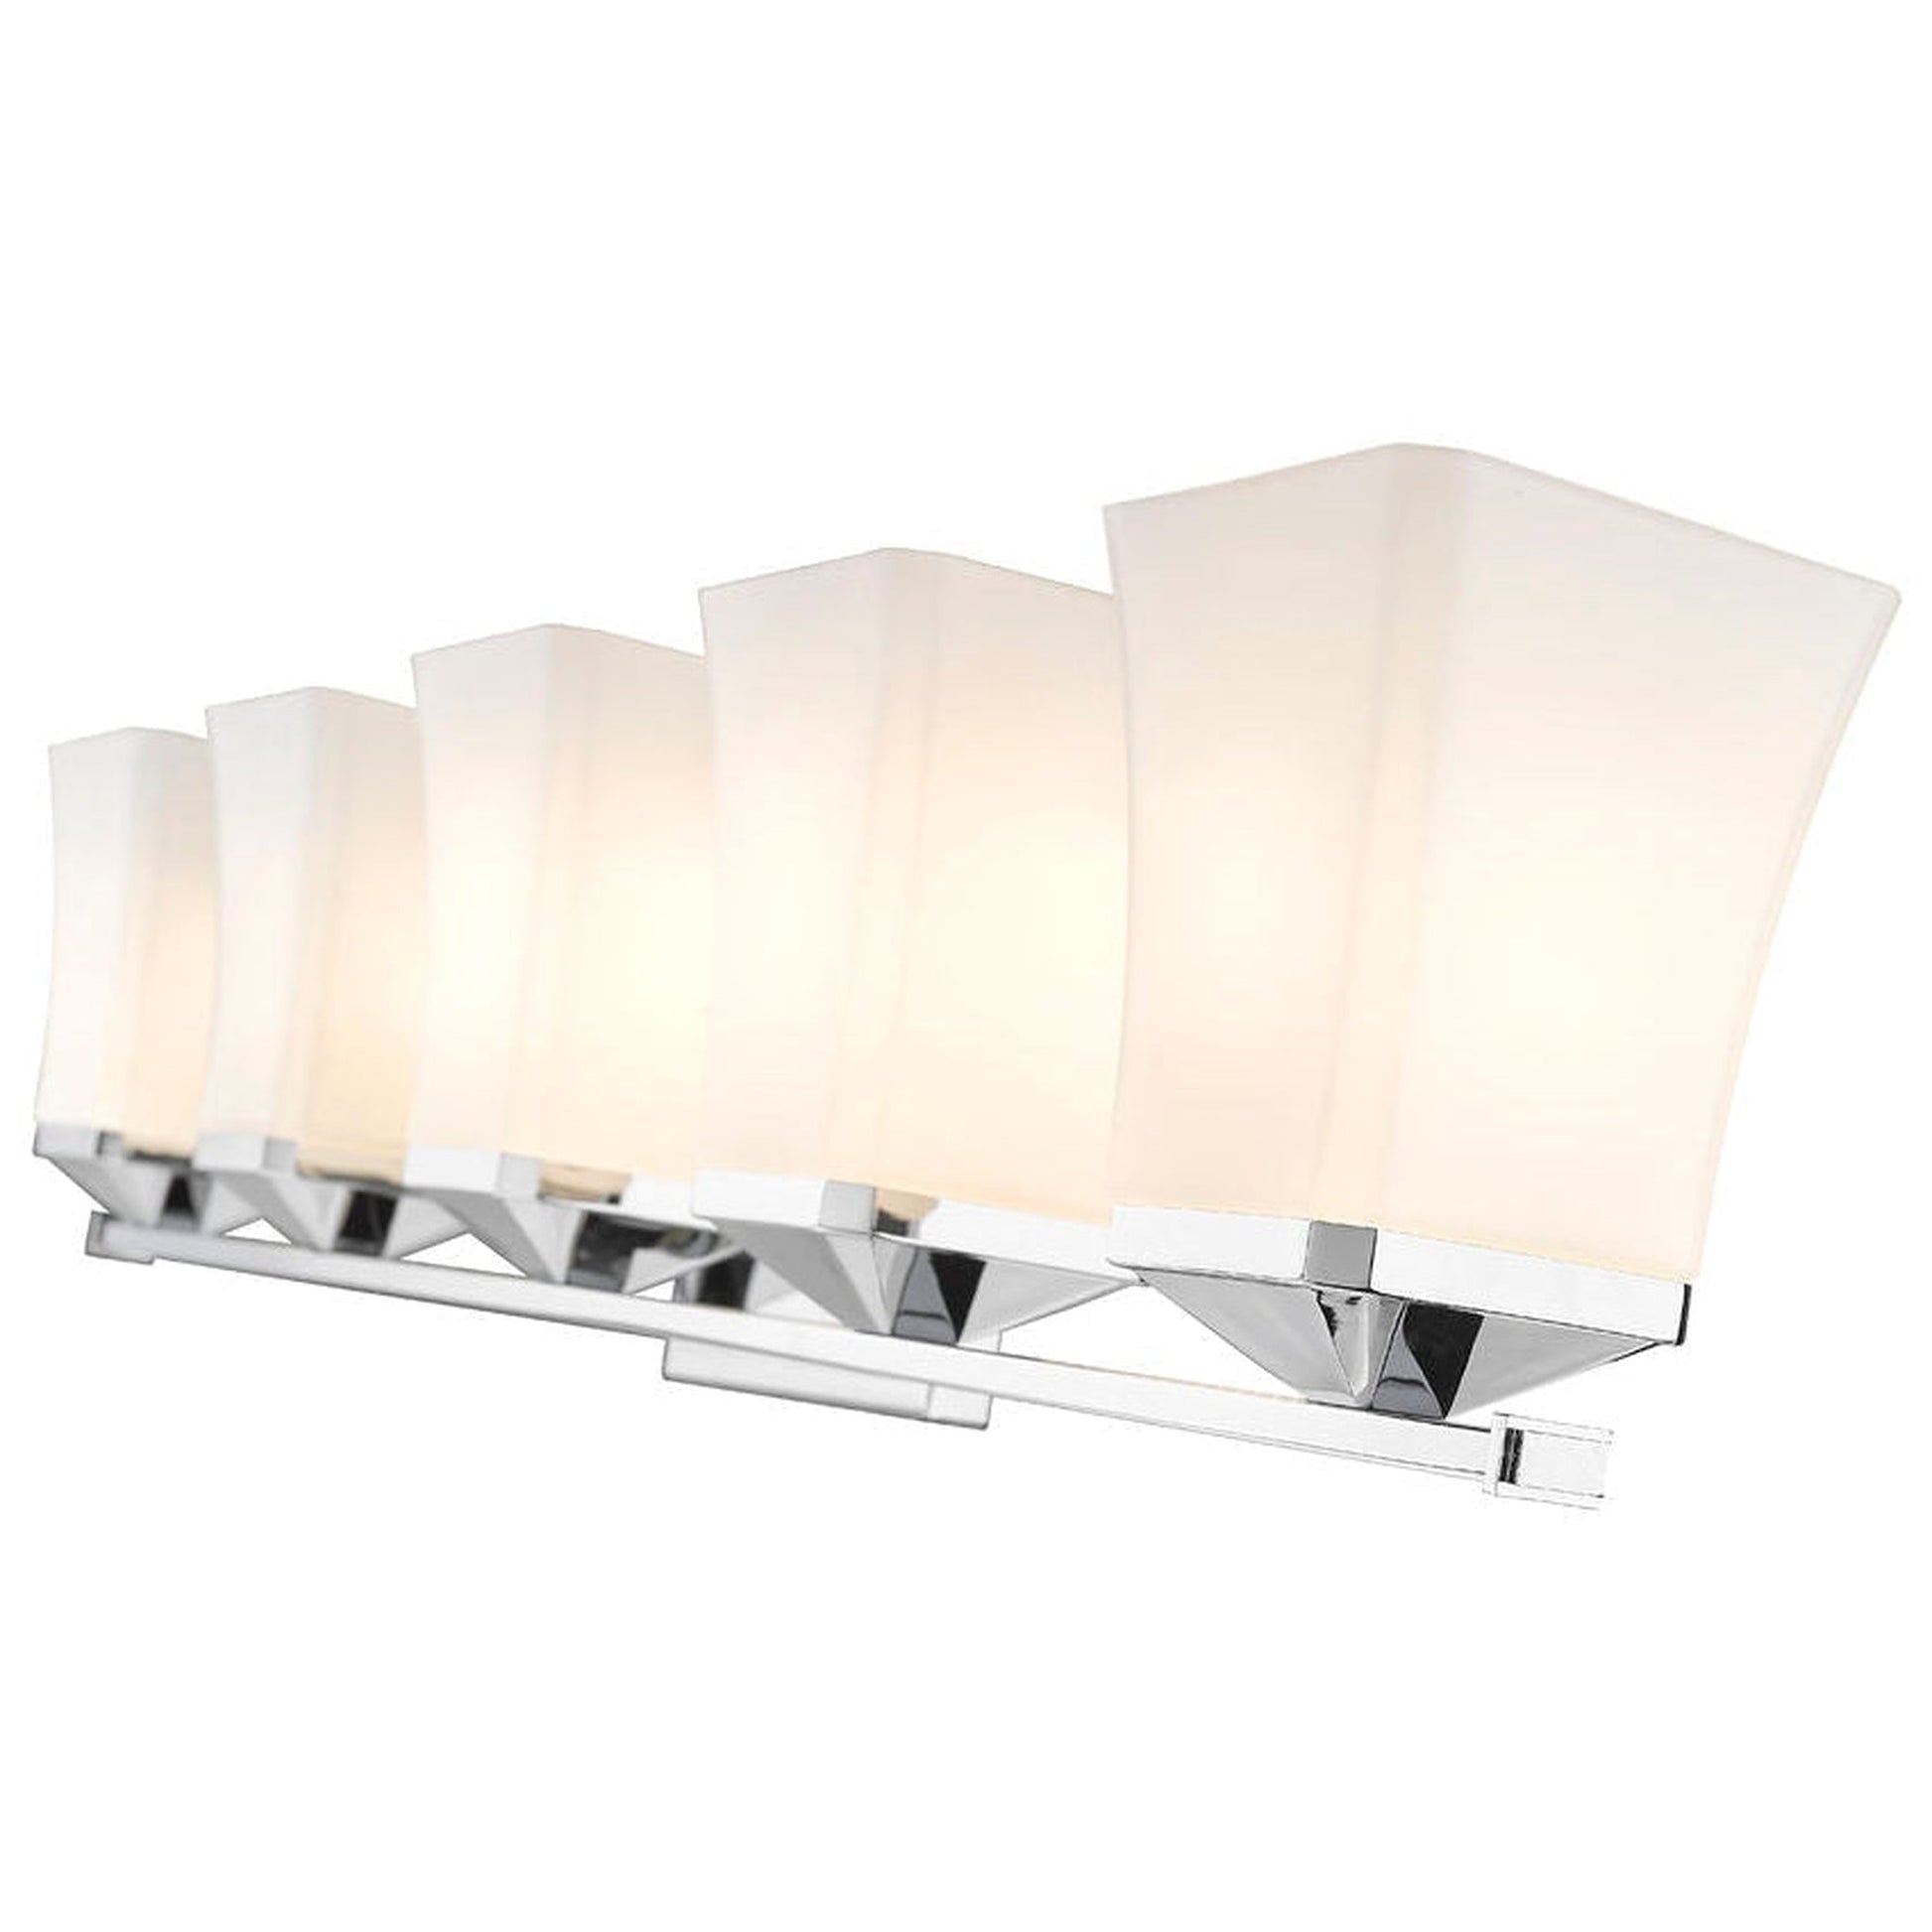 Z-Lite Darcy 38" 5-Light Chrome Vanity Light With Etched Opal Glass Shade